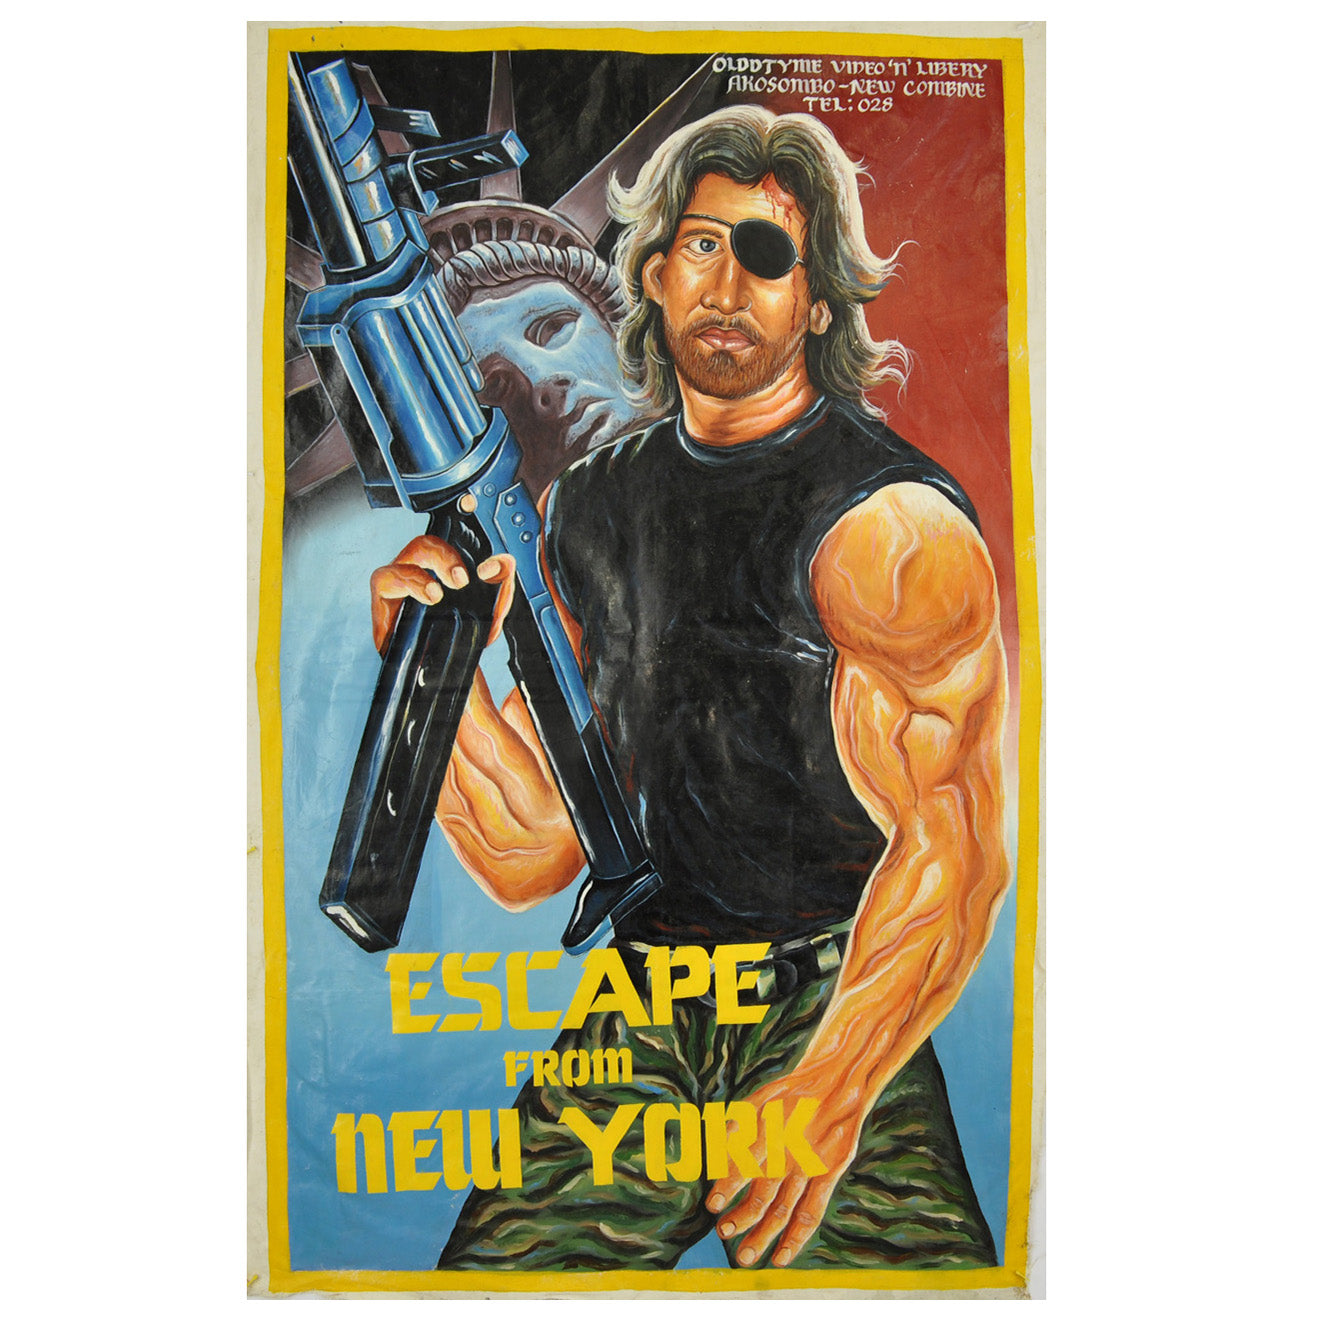 ESCAPE FROM NEW YORK MOVIE POSTER HAND PAINTED IN GHANA FOR THE LOCAL CINEMA